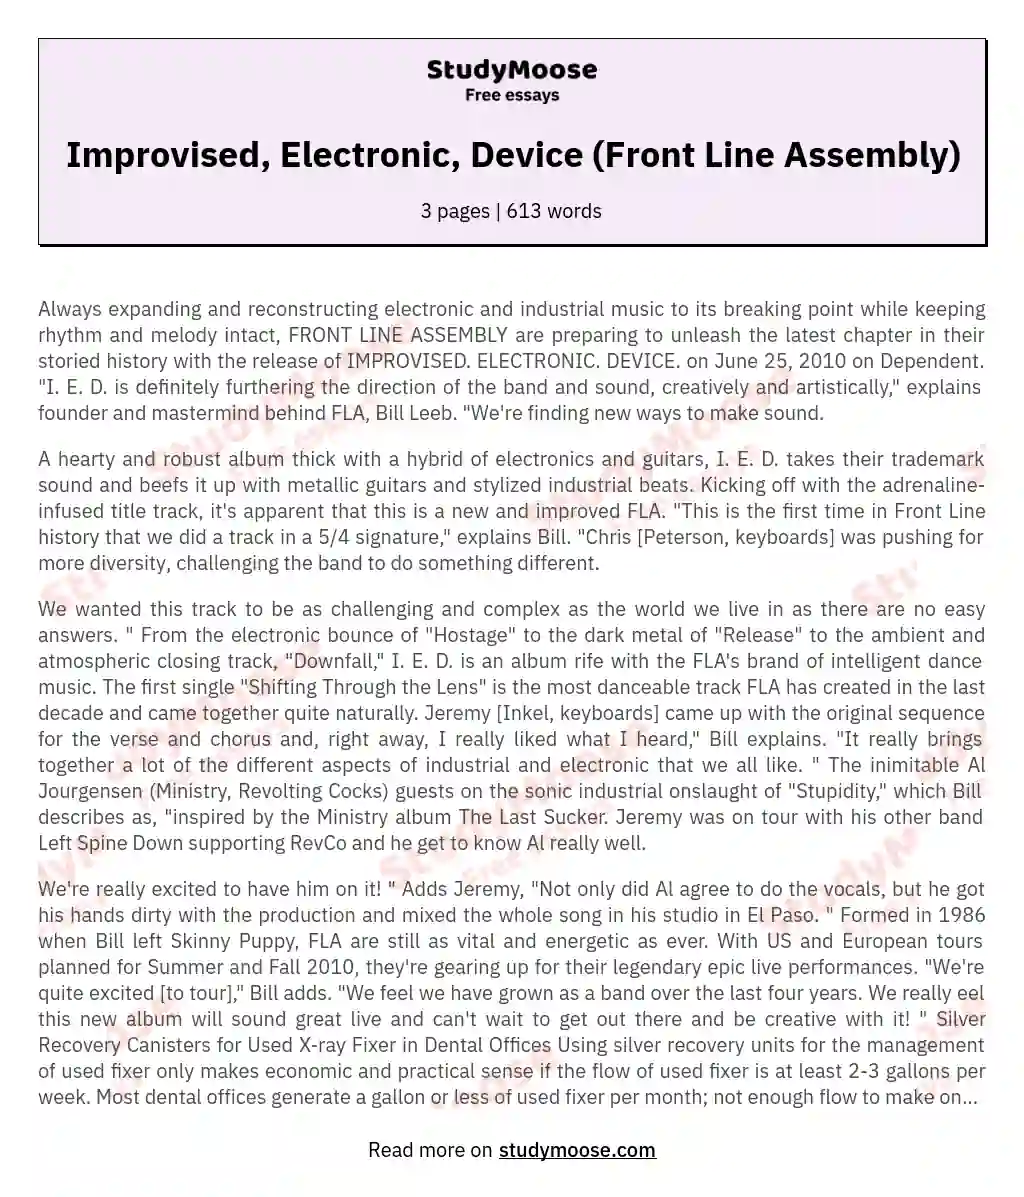 Improvised, Electronic, Device (Front Line Assembly) essay